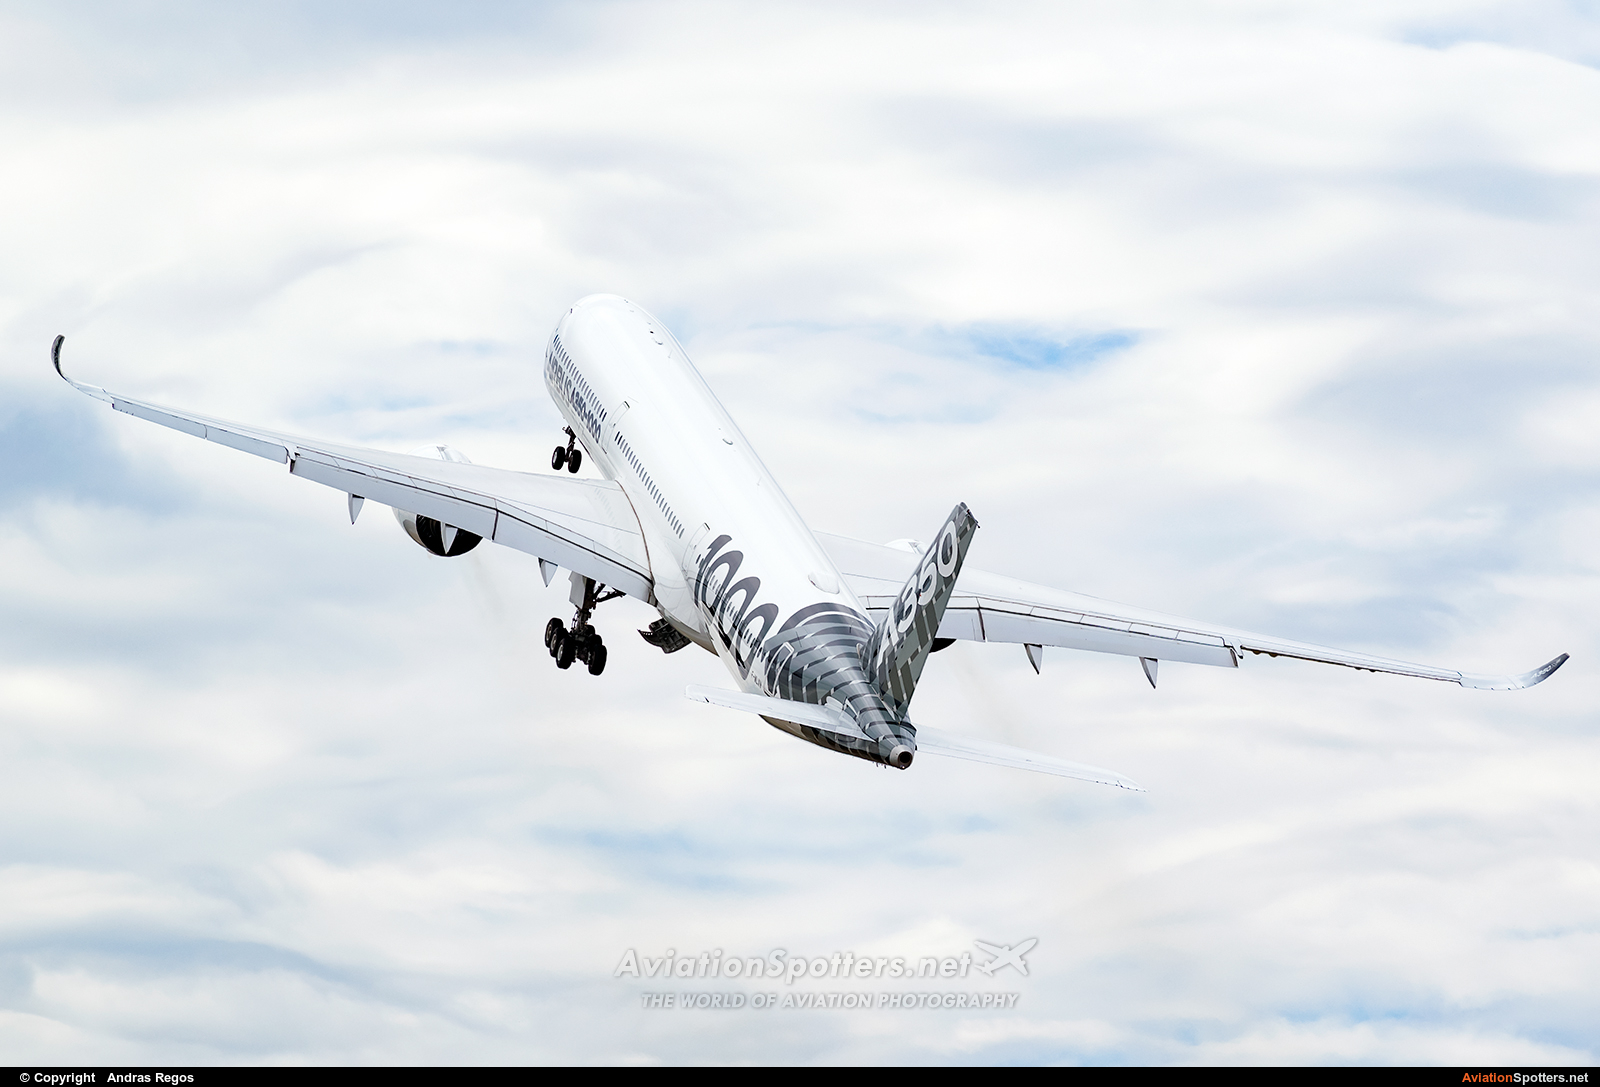 Airbus Industrie  -  A350-900  (F-WLXV) By Andras Regos (regos)